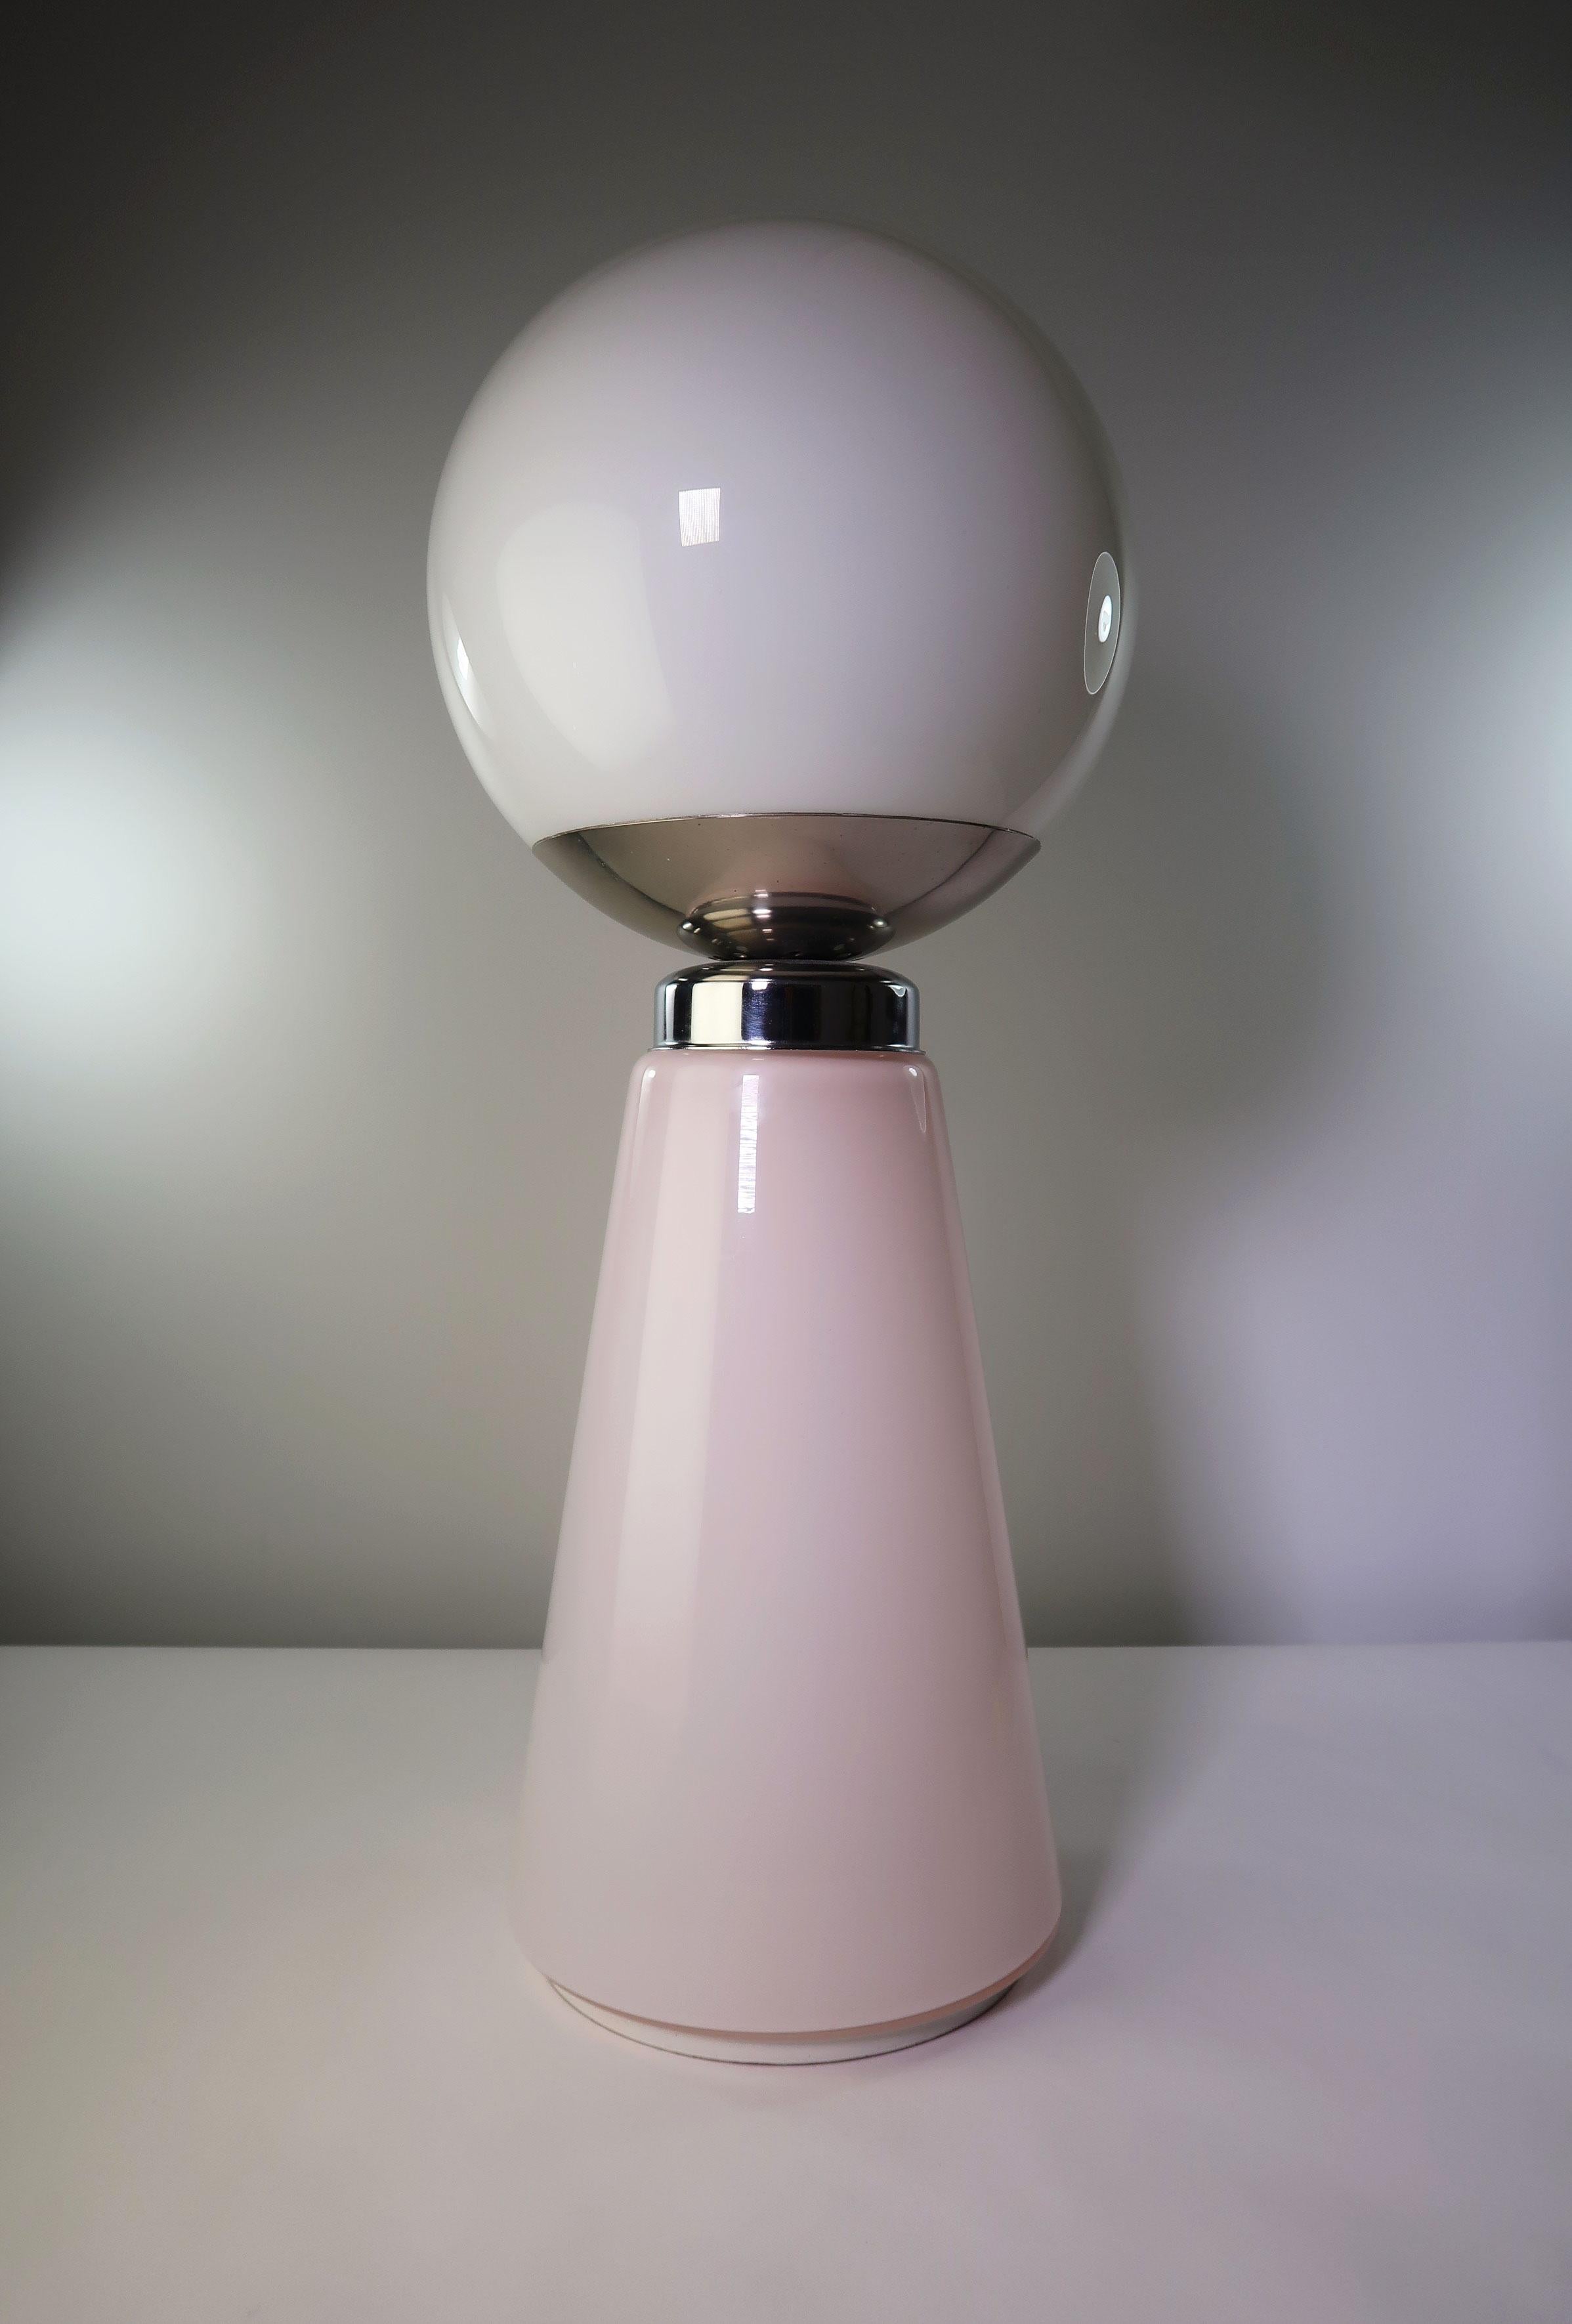 Stunning Italian modernist, Minimalist Mazzega Murano opaline glass table lamp tall enough to be used as a floor lamp as well as a table lamp. Rose colored cone body (Birillo), milky white globe top and metal mount holding the two together. Bulb in